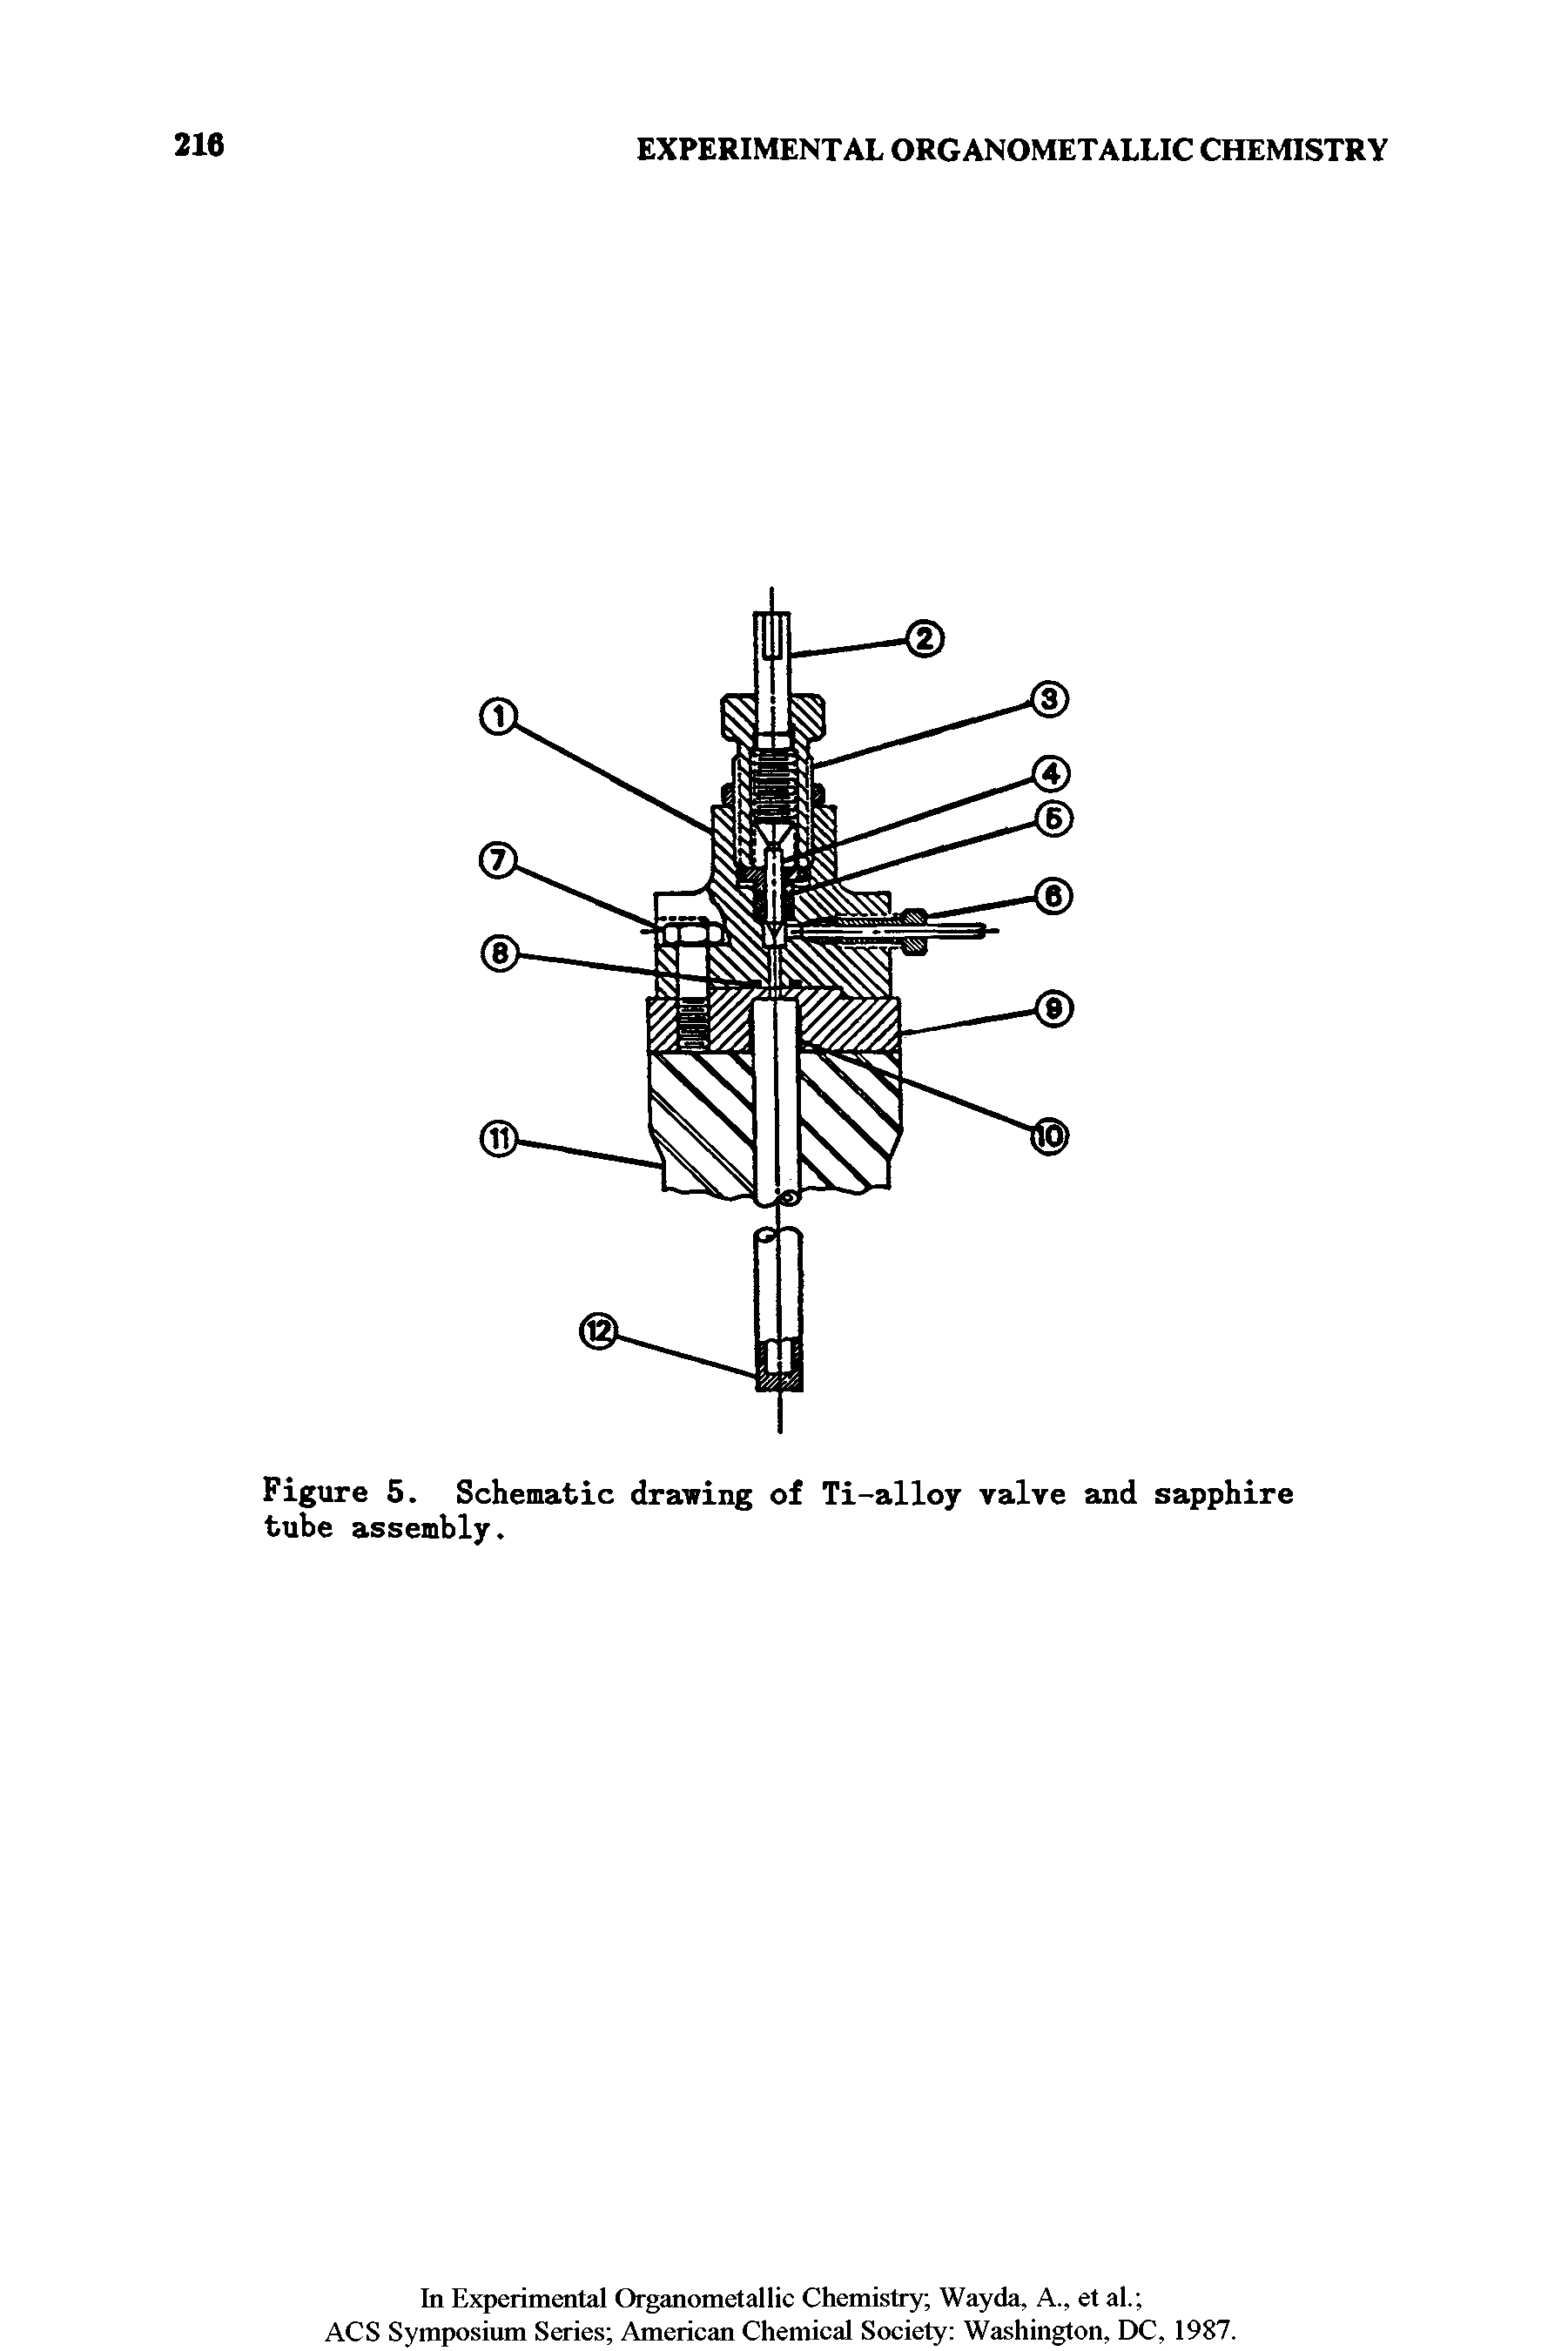 Figure 5. Schematic drawing of Ti-alloy valve and sapphire tube assembly.